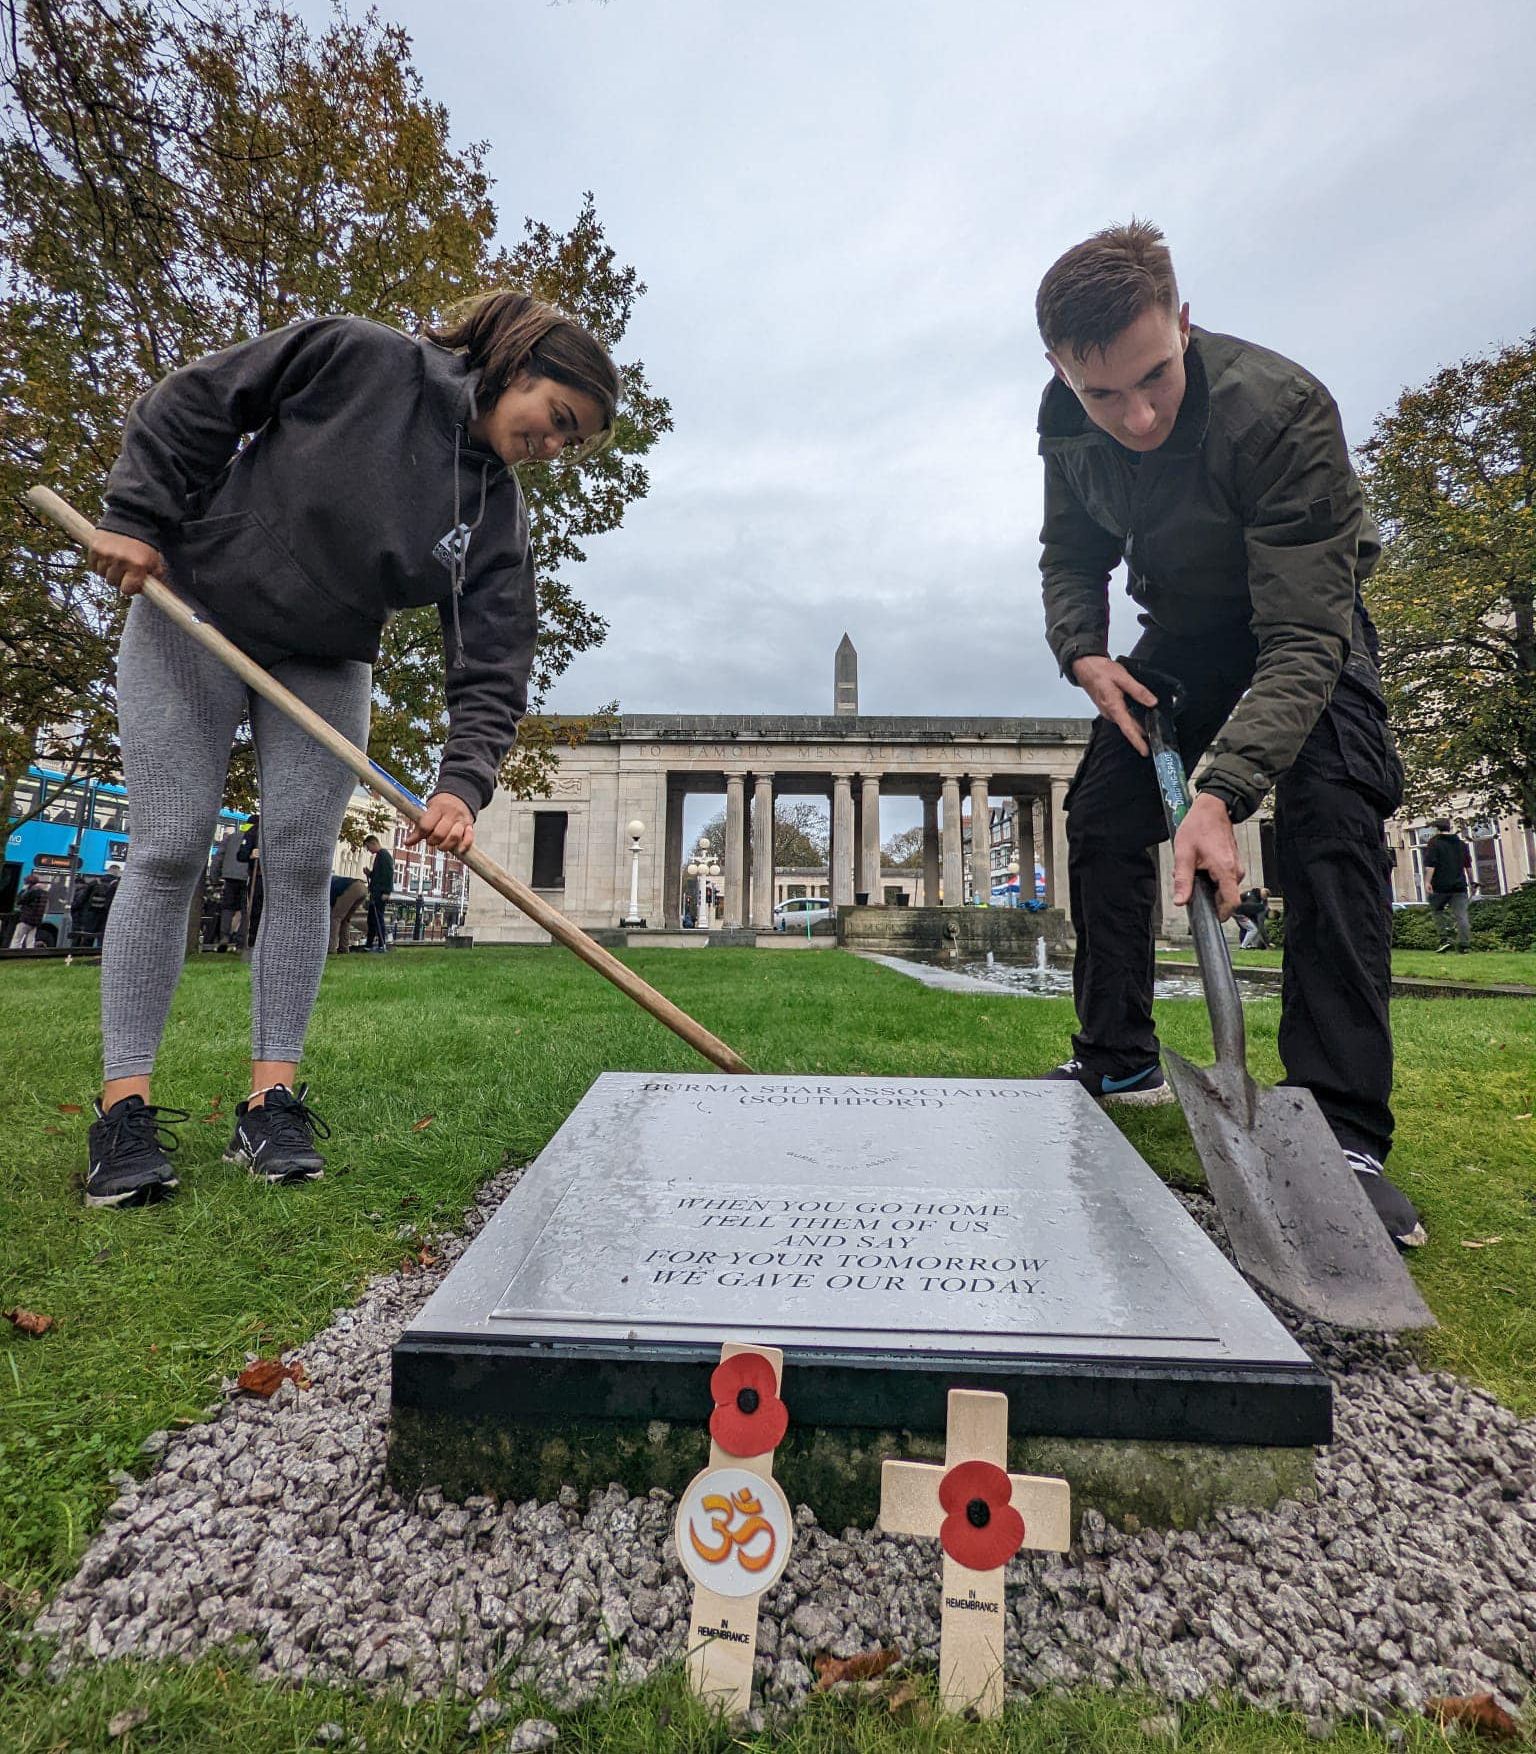 Volunteers from Southport Royal British Legion and Royal Air Force Cadets spent their Sunday making the Monument in Southport and the gardens around it look spotless in time for the Remembrance Sunday celebrations